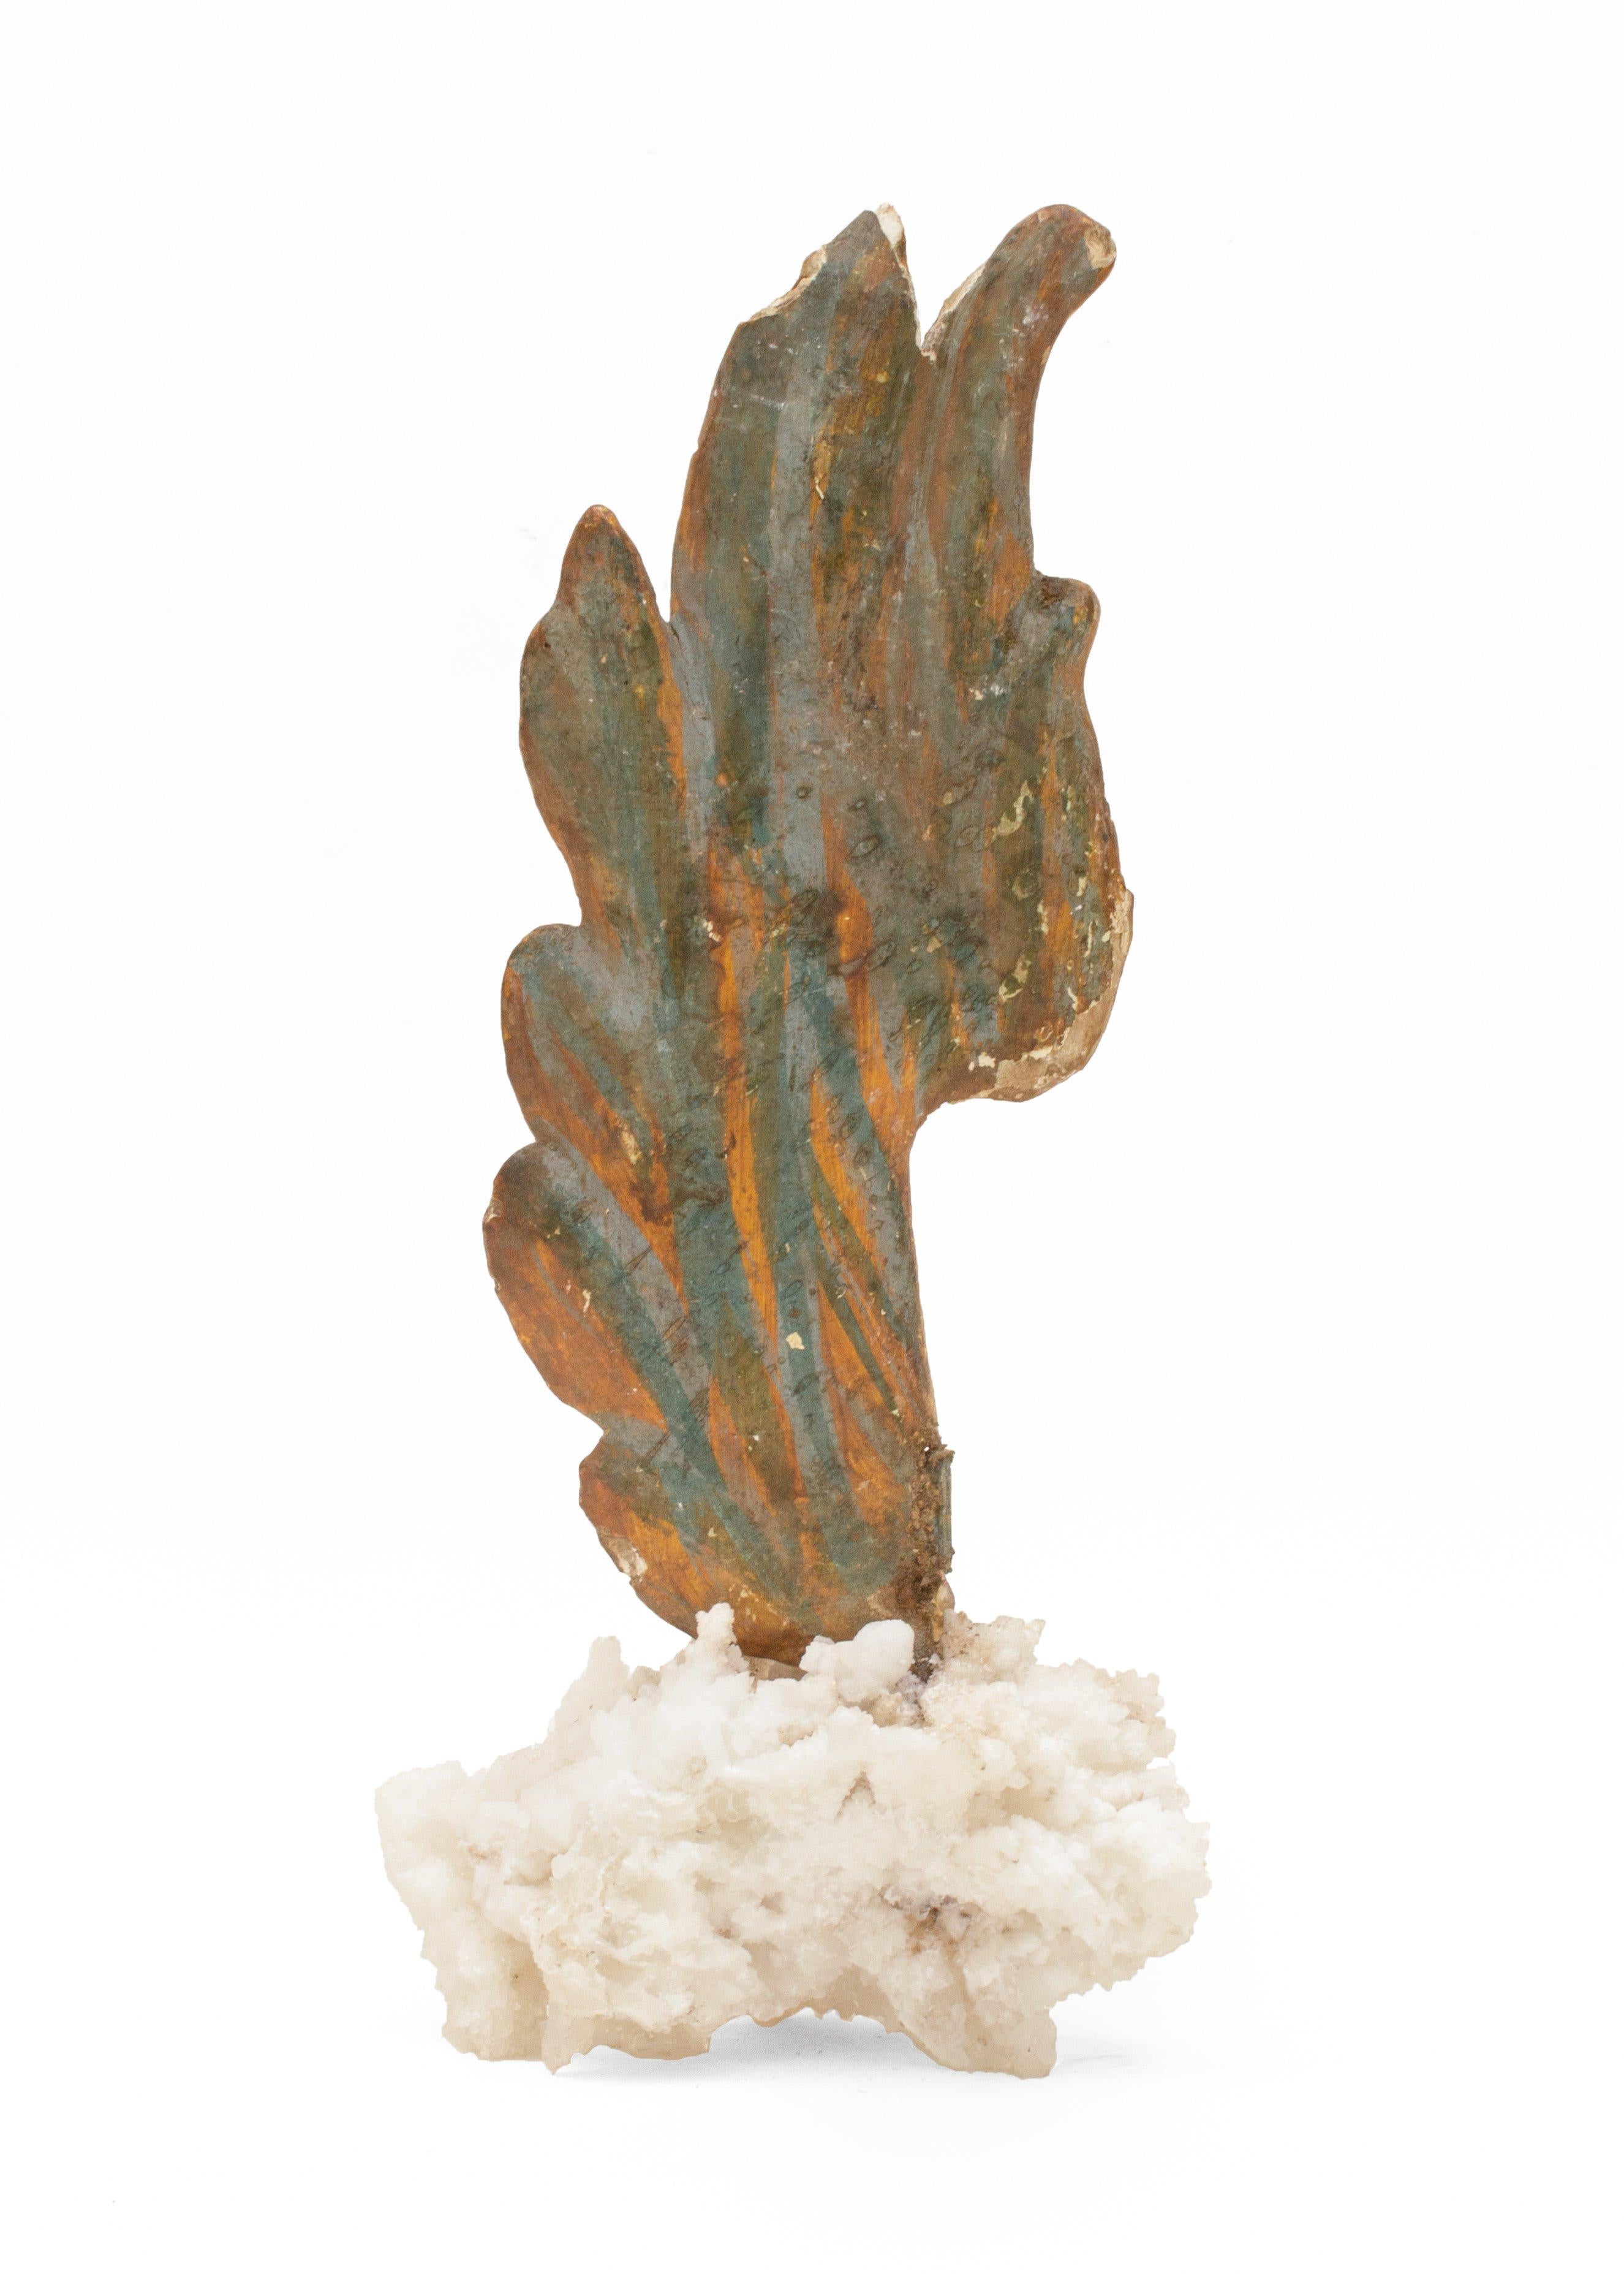 Hand-Carved 18th Century Italian Angel Wing with Citrine Points on an Aragonite Crystal Base